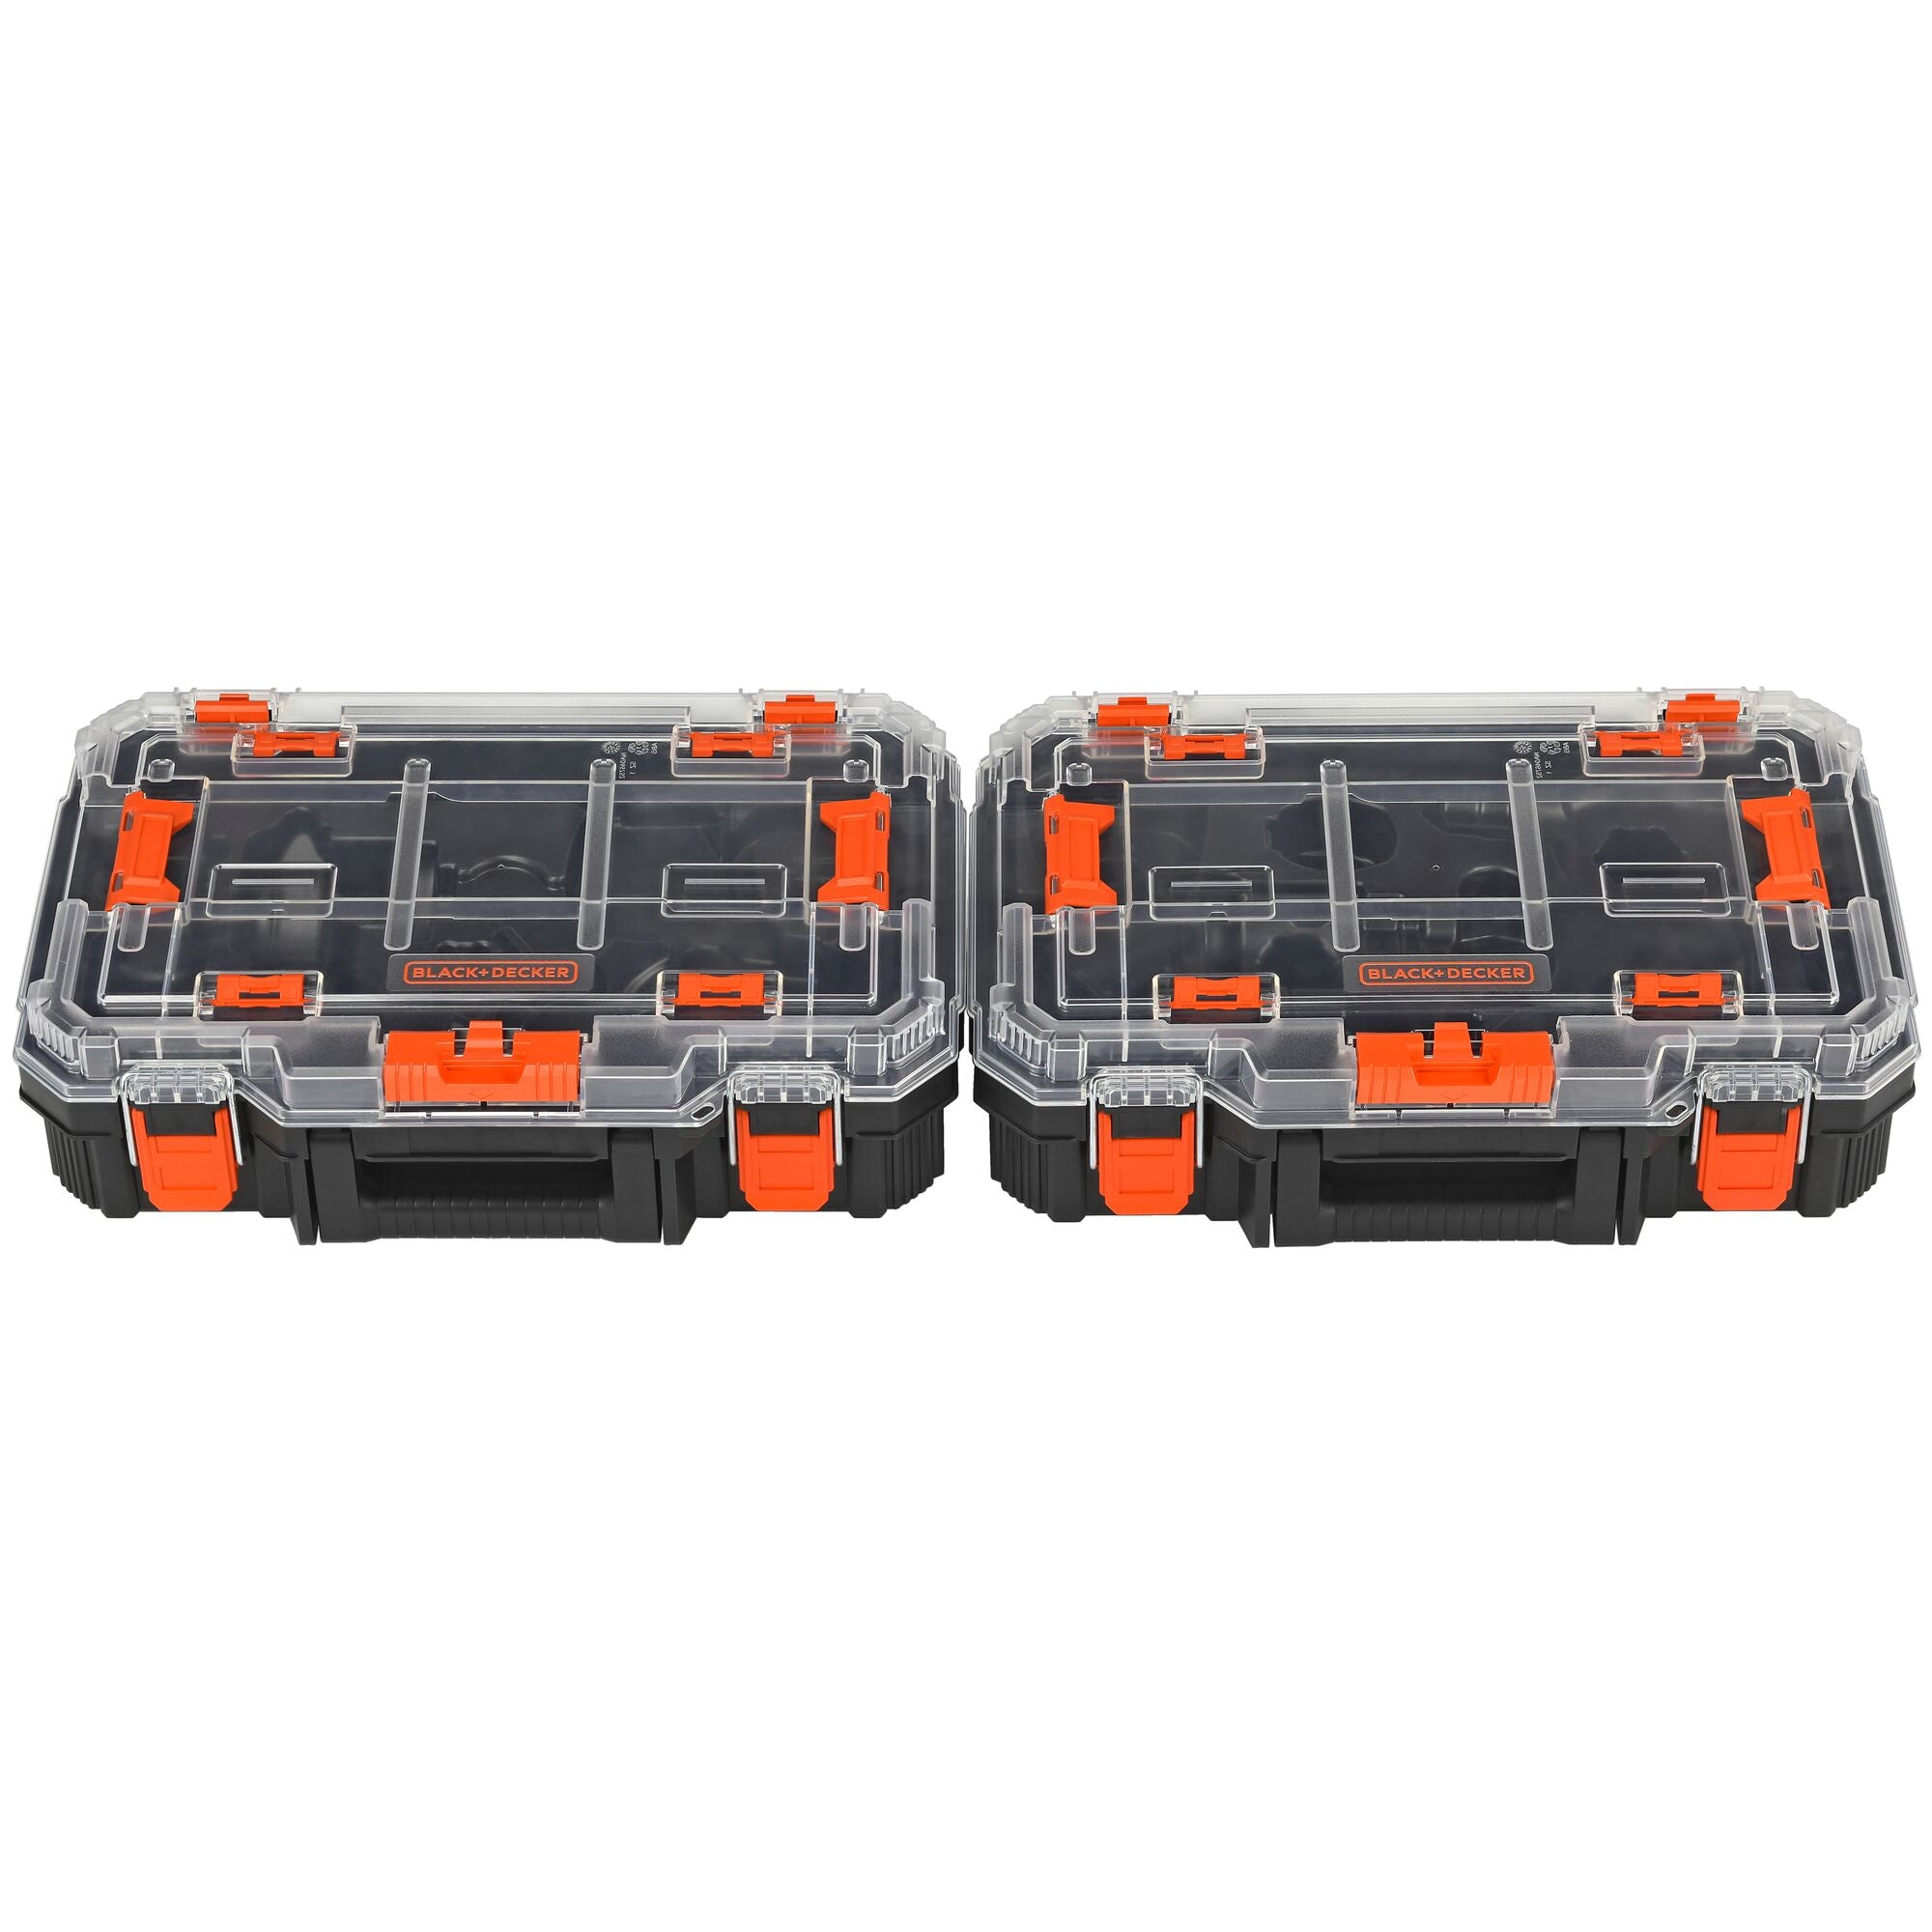 BLACK+DECKER 6-Tool Power Tool Combo Kit with Hard Case (1-Battery